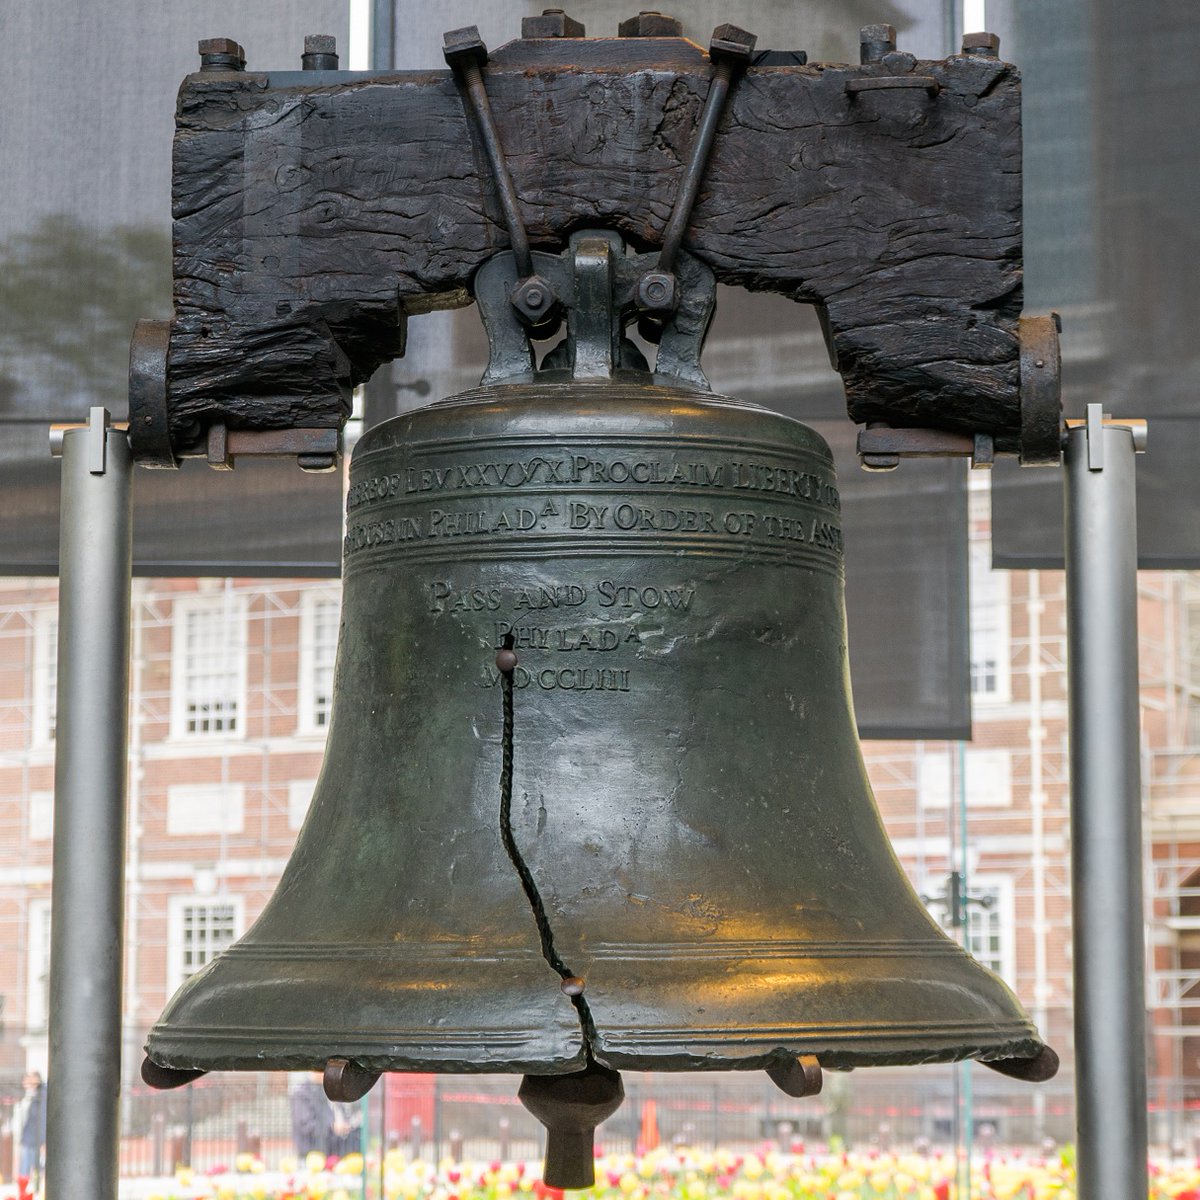 Who knows what year was the last time the Liberty Bell was rang? 🔔 A - 1776 B - 1932 C - 1846 D - 1865 #LibertyBell #Philadelphia #history